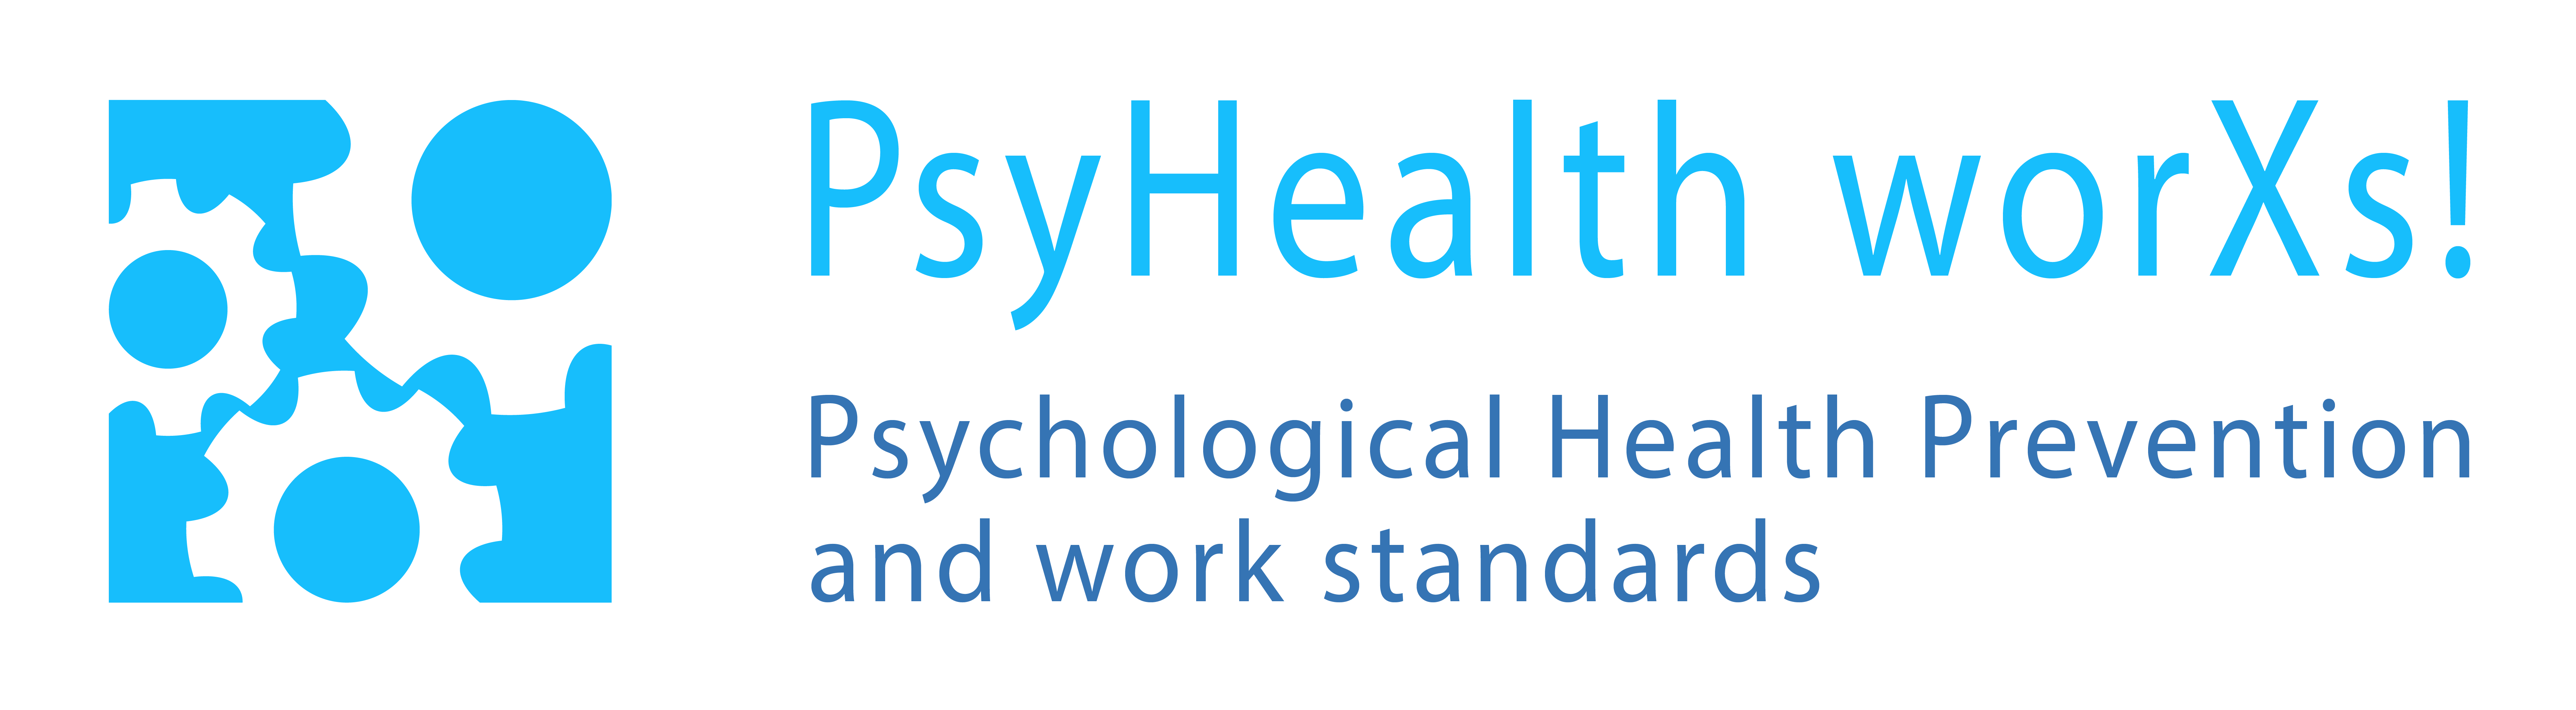 PsyHealth worXs! Psychosocial Health Prevention and Work Standards